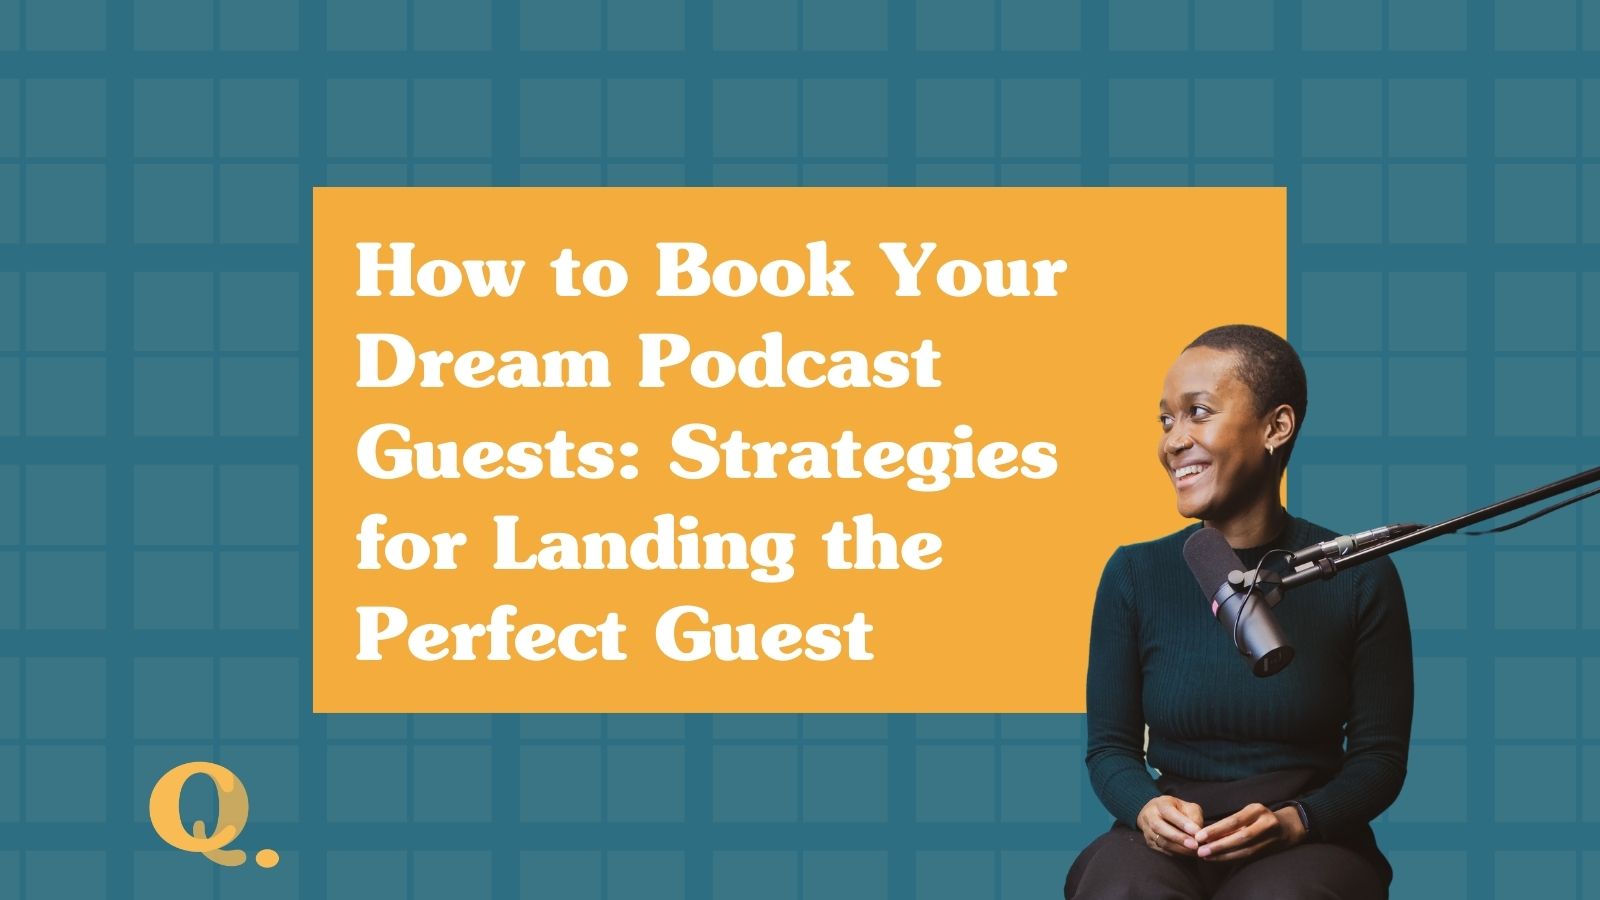 Guide: How to Book Your Dream Podcast Guests: Strategies for Landing the Perfect Guest